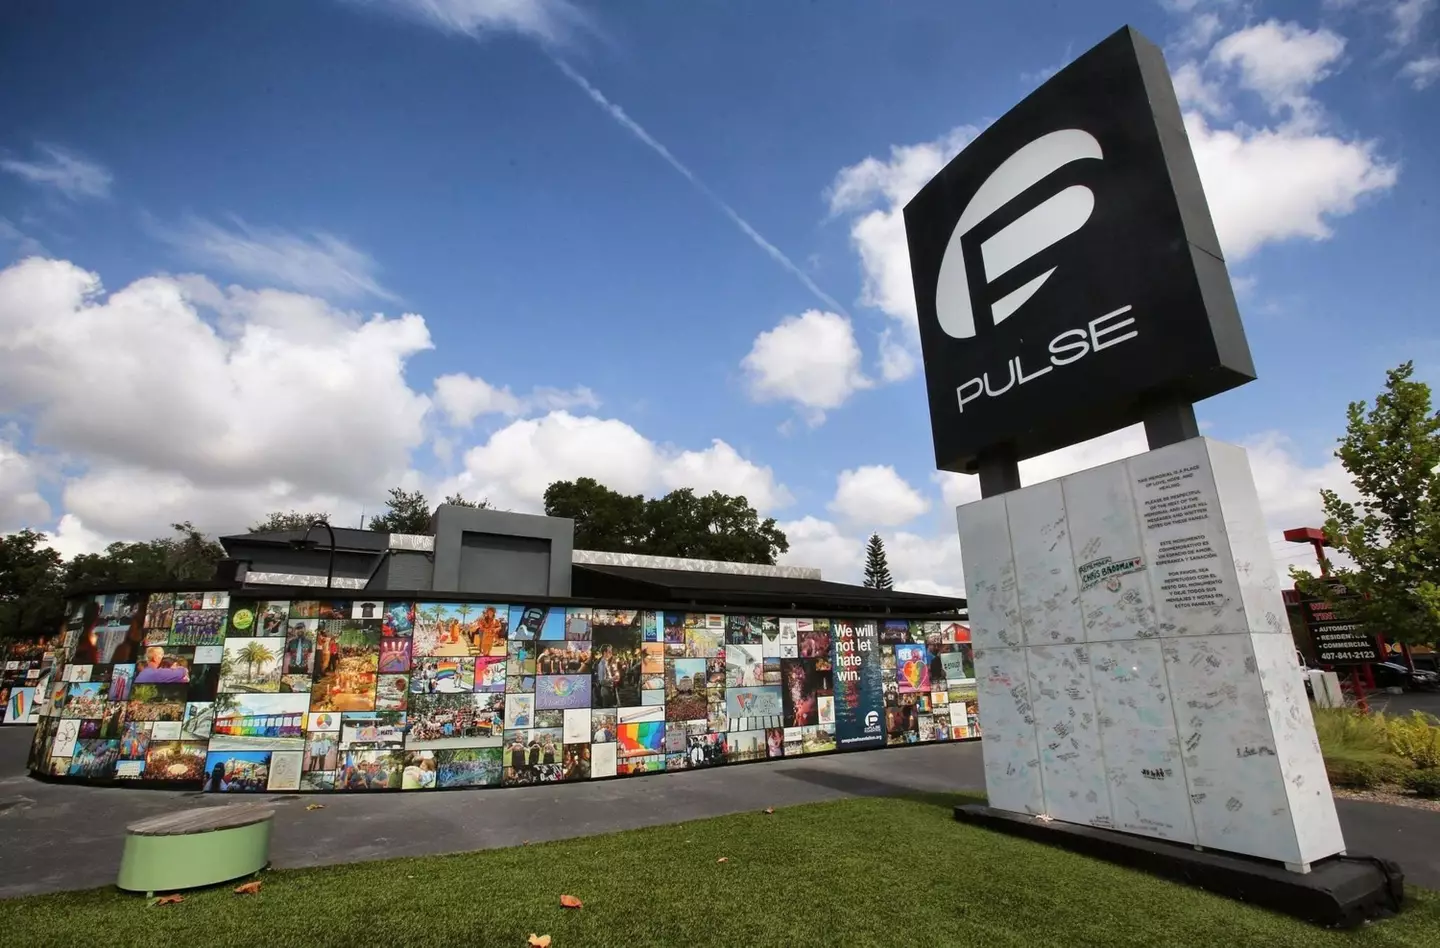 49 people were murdered during a shooting at Pulse nightclub in 2016 (Alamy)